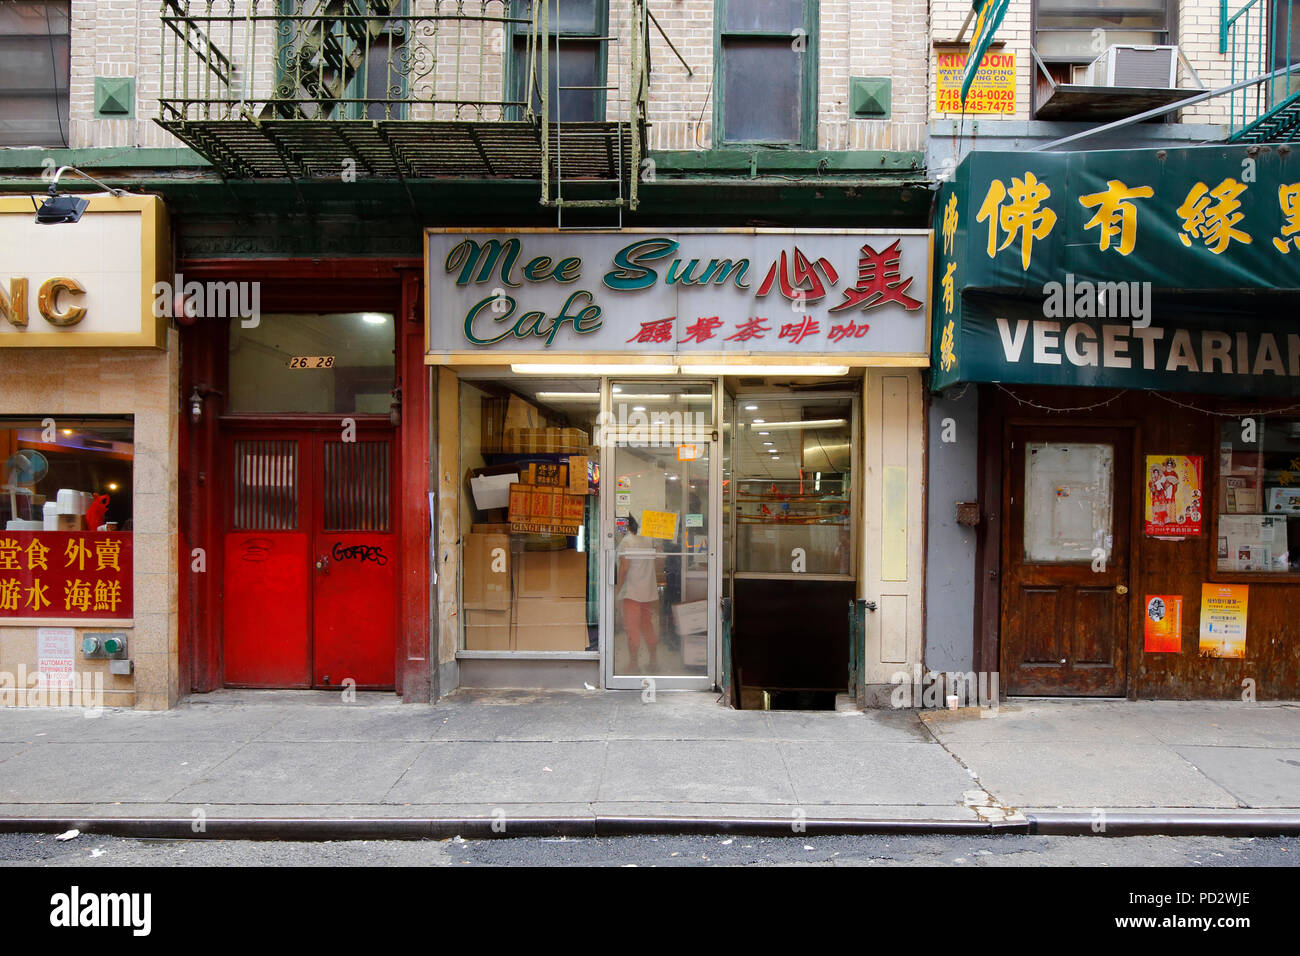 Mee Sum Cafe 美心, 26 Pell St, New York, NY. exterior storefront of a coffee shop in the Chinatown neighborhood of Manhattan. Stock Photo